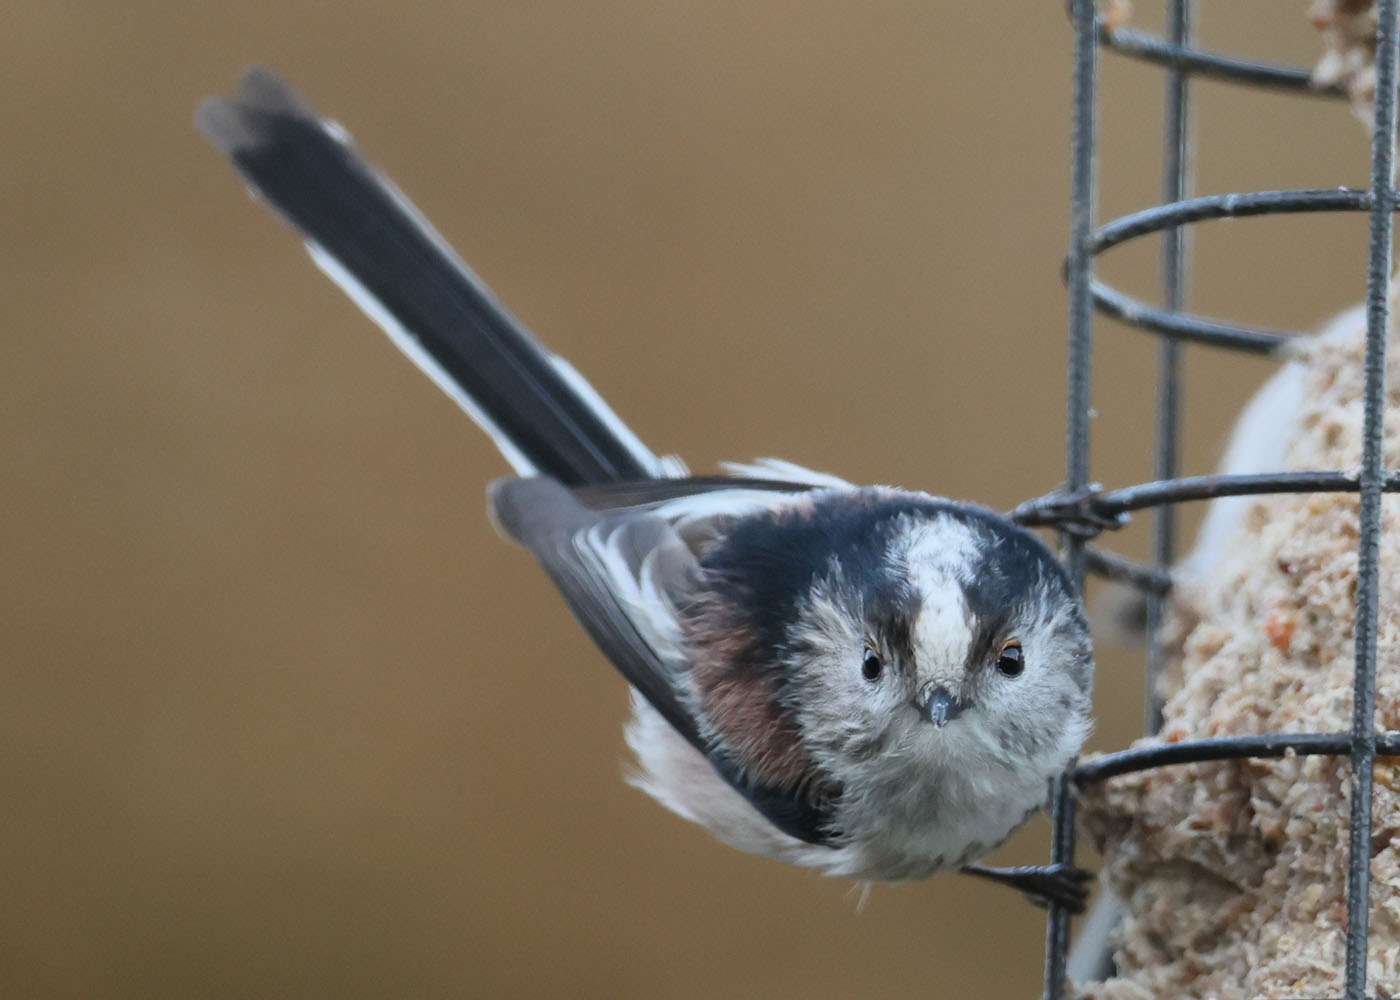 Long-tailed Tit by Steve Hopper at South Brent